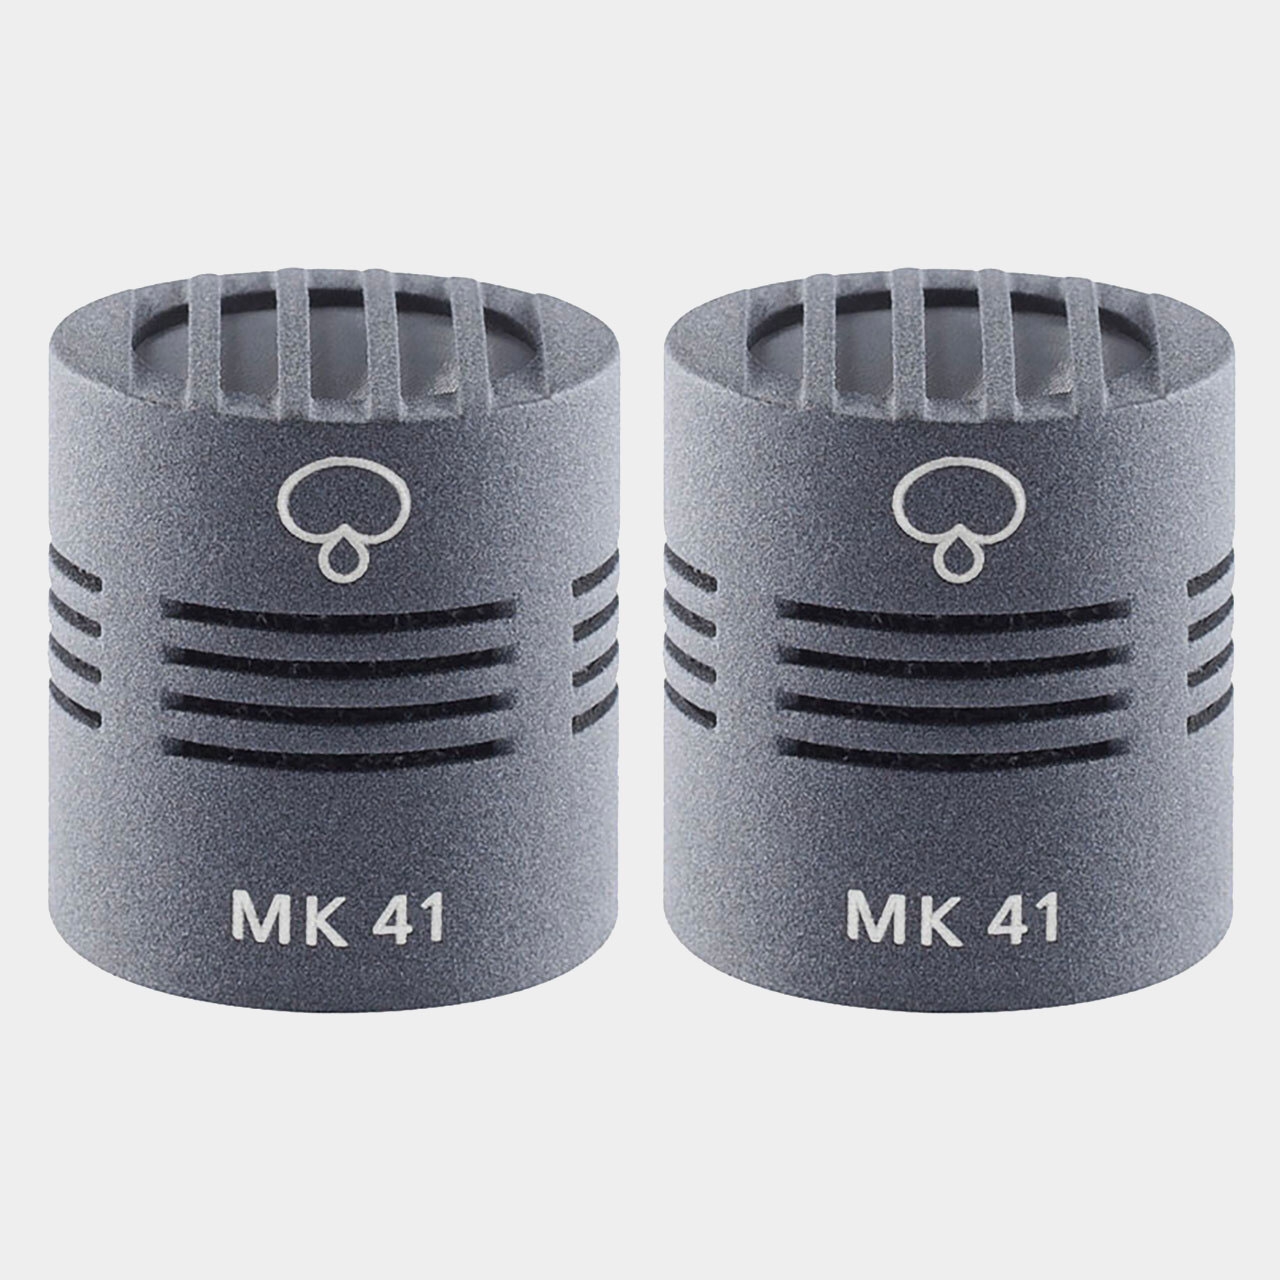 Schoeps MK 41 Supercardioid Capsules (Matched Pair)